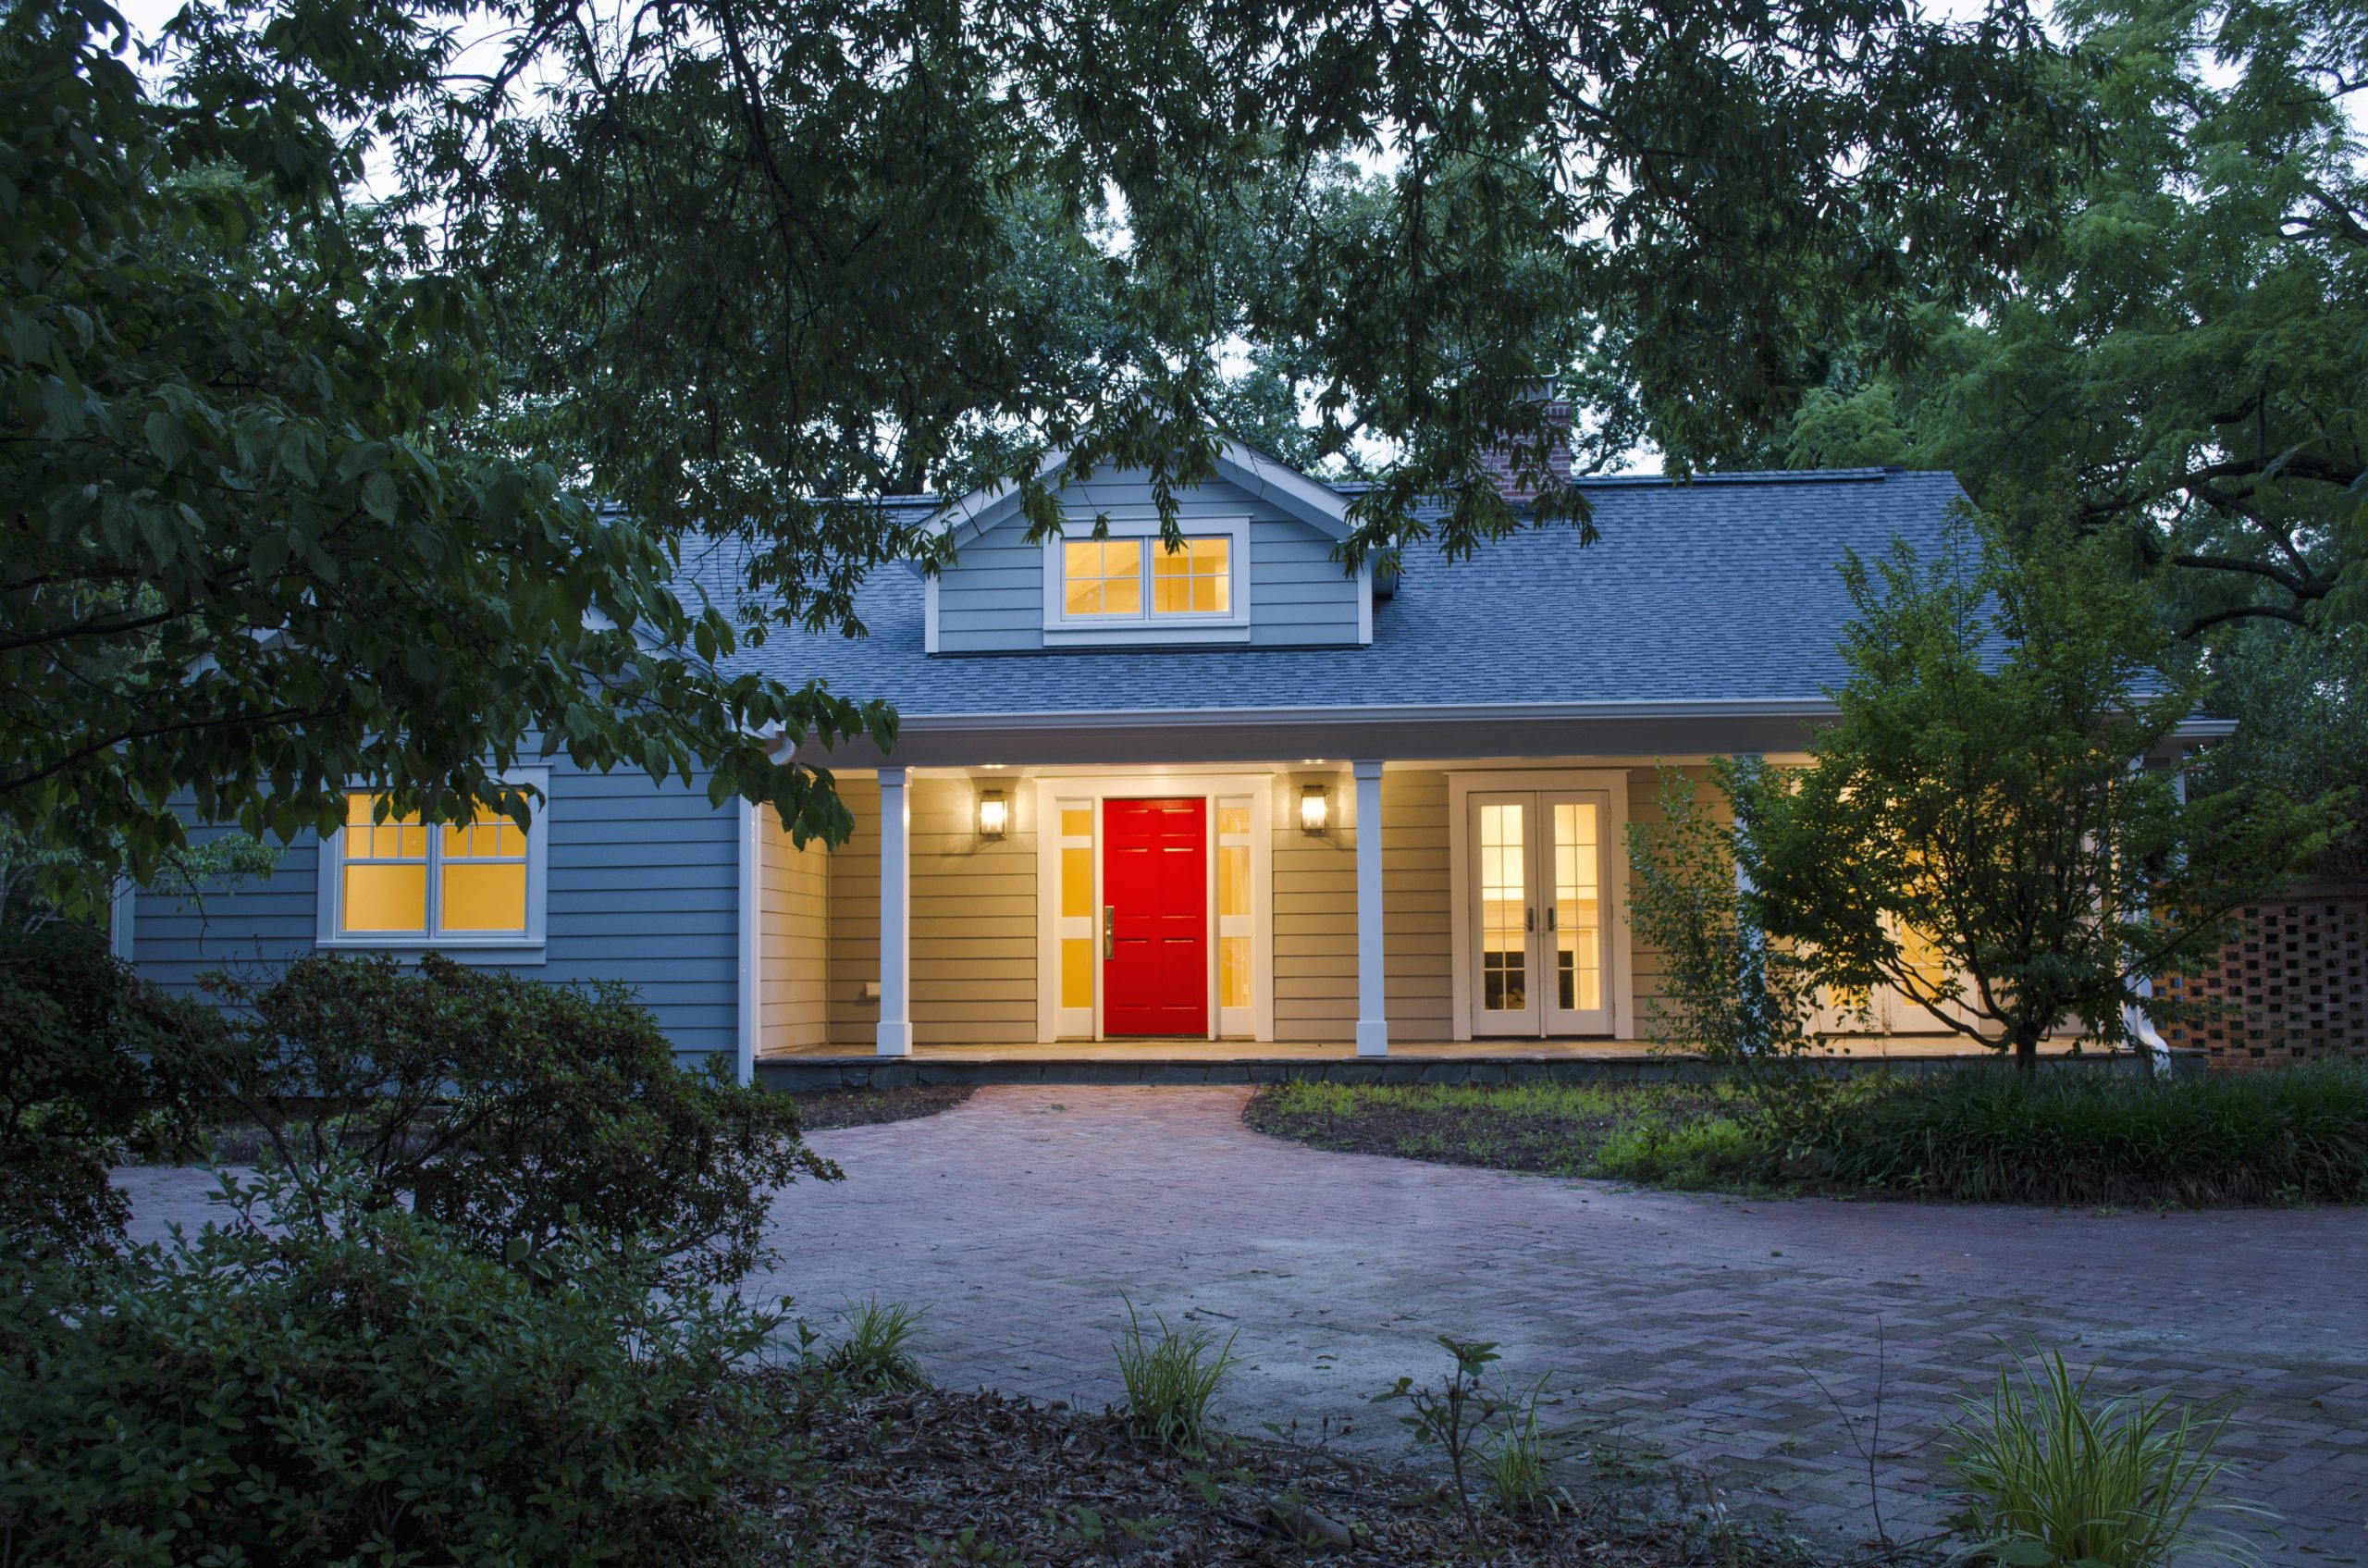 An exterior view of the house at dusk tucked away among the trees. The lights from within illuminate the front porch and red front door.